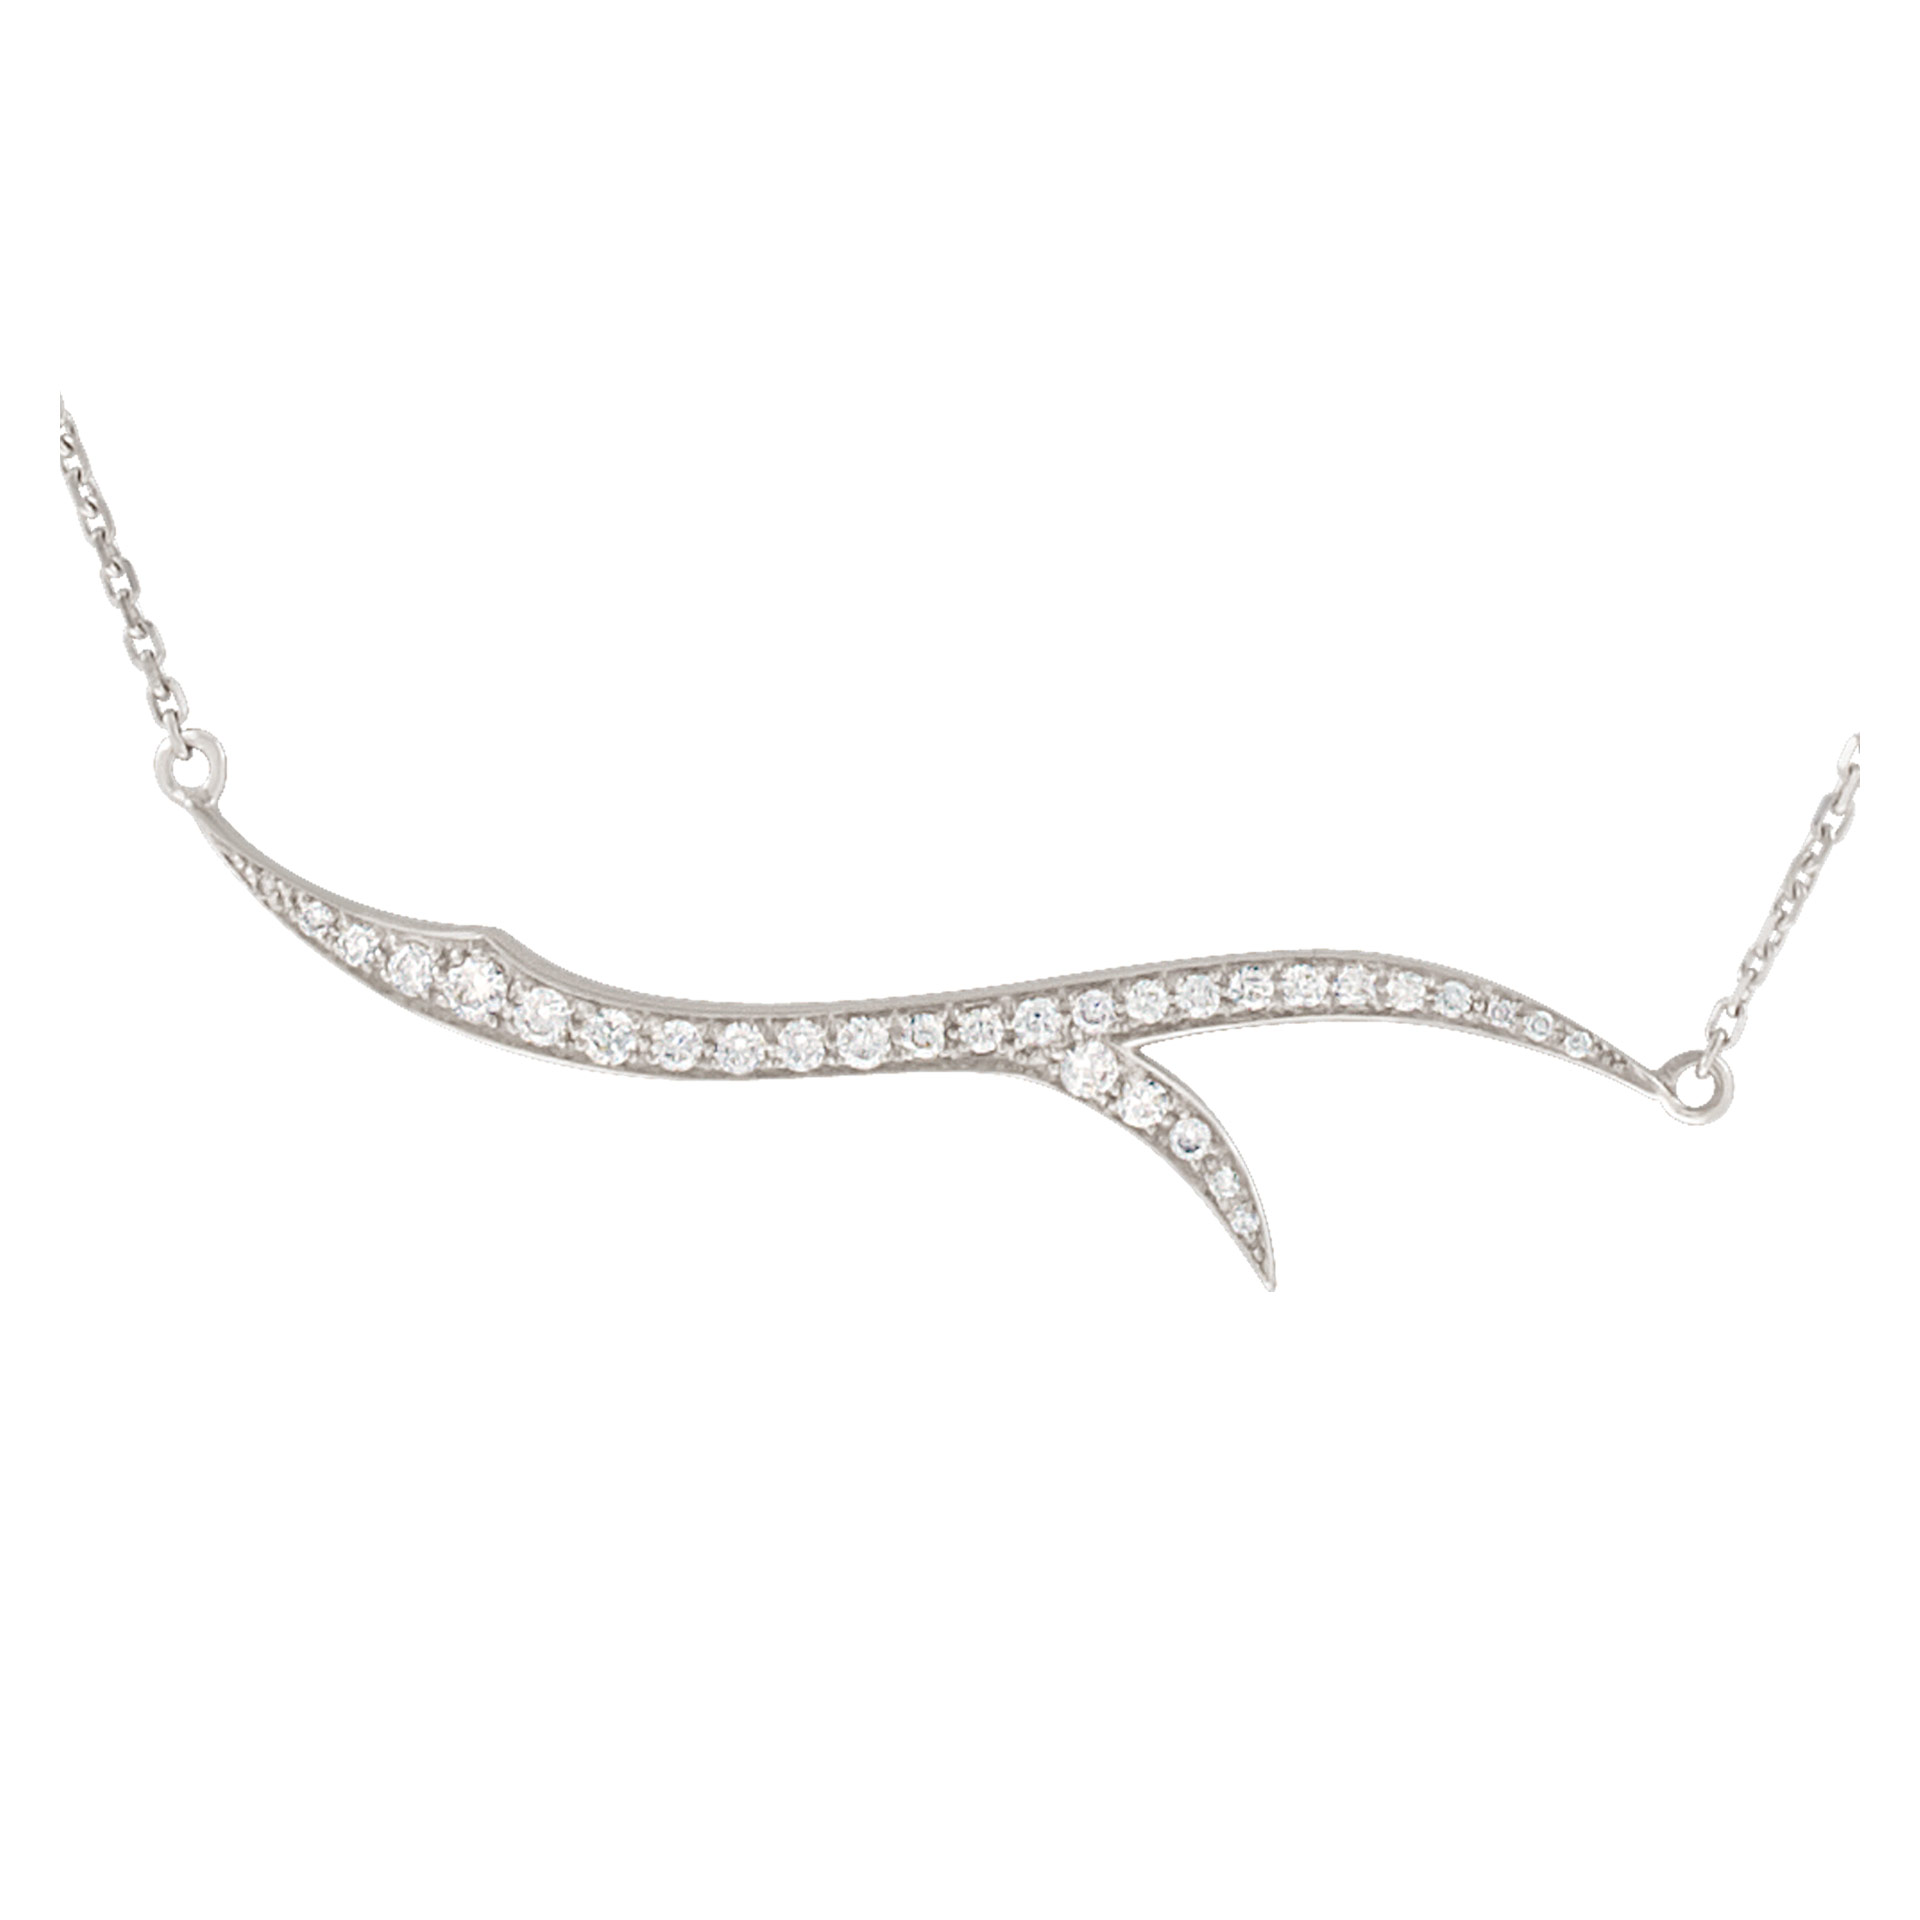 Stephen Webster 18k white gold necklace with diamonds